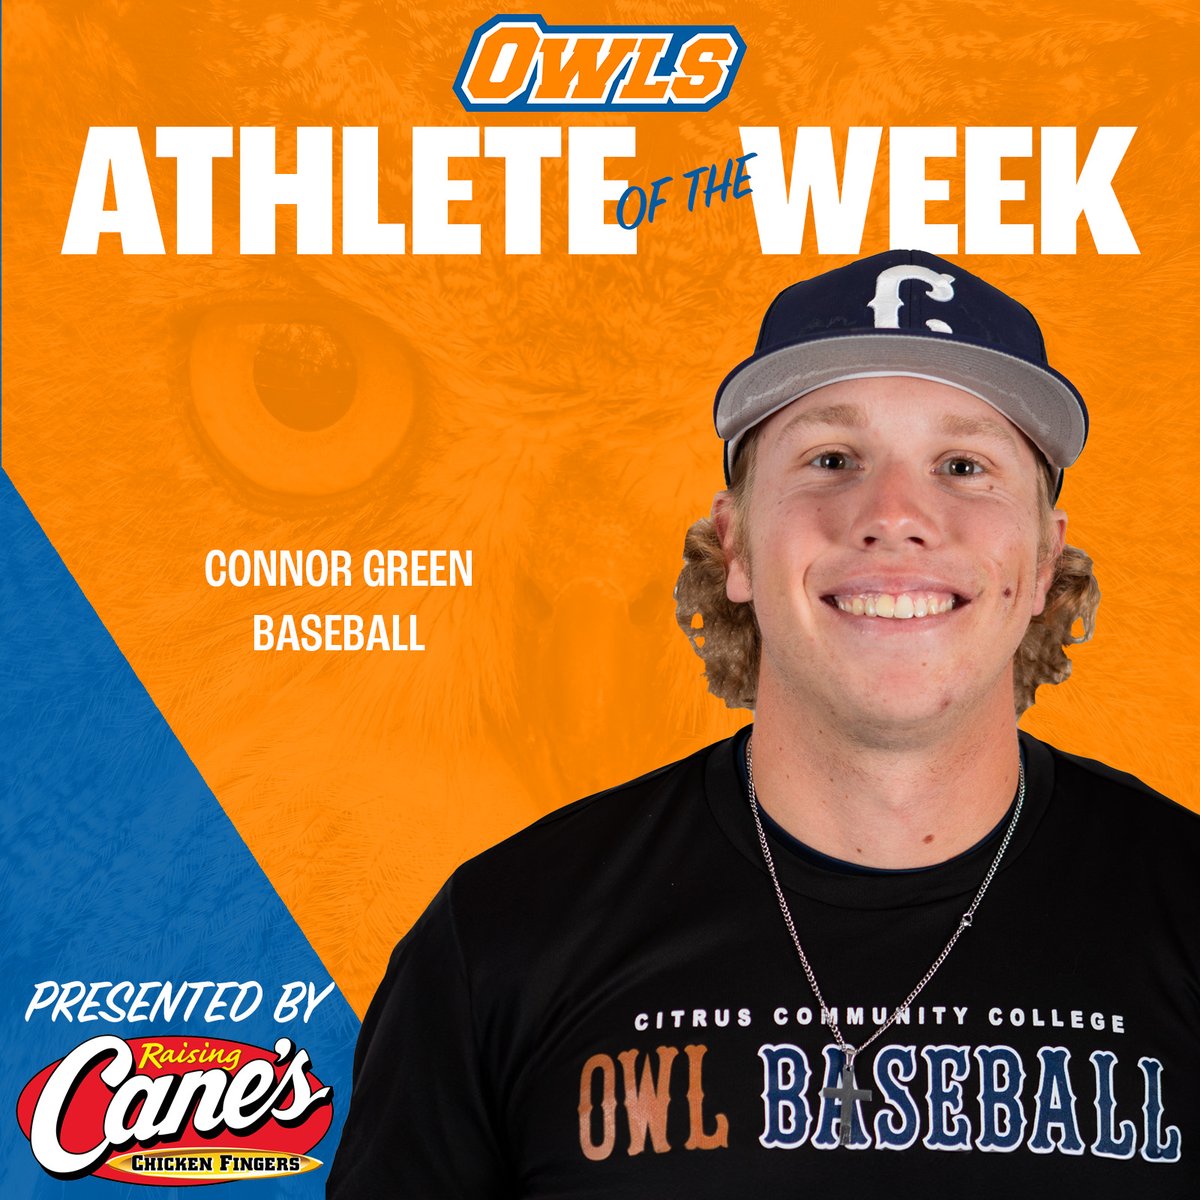 🤩 This week's Men's Athlete of the Week, presented by @raisingcanes, is Citrus Baseball's Connor Green! The sophomore went 5-for-9 last week with five runs and four RBIs. He had two doubles, blasted one home run, and drew six walks. 🦉 #citrUS